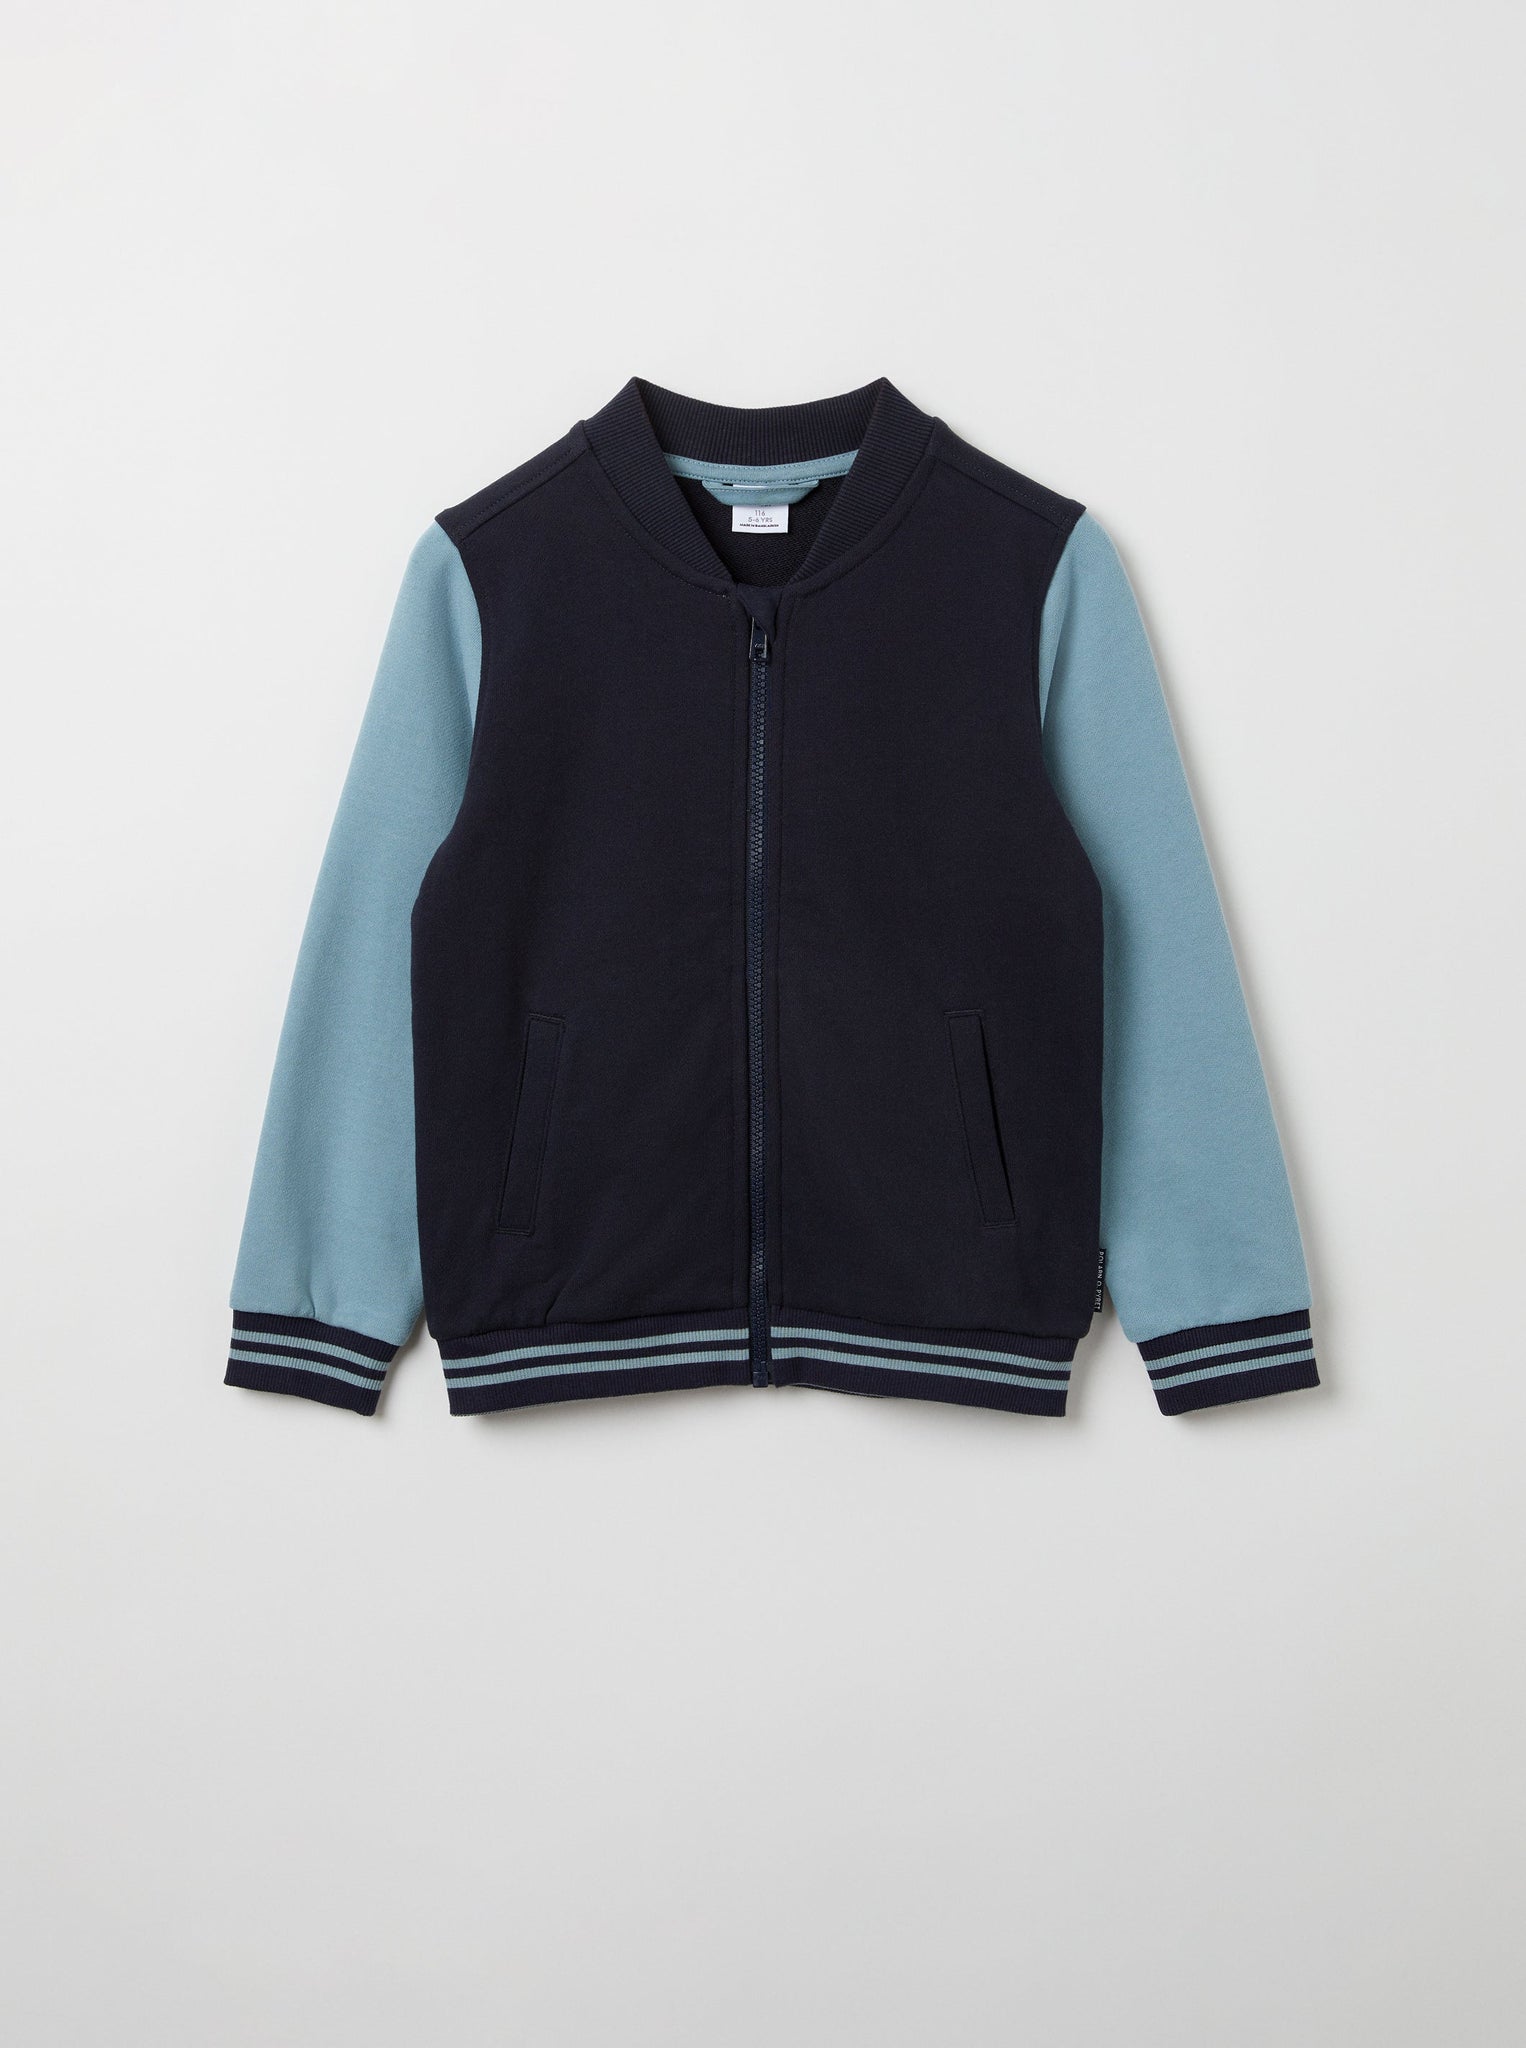 Organic Cotton Kids Baseball Jacket from the Polarn O. Pyret kidswear collection. The best ethical kids clothes